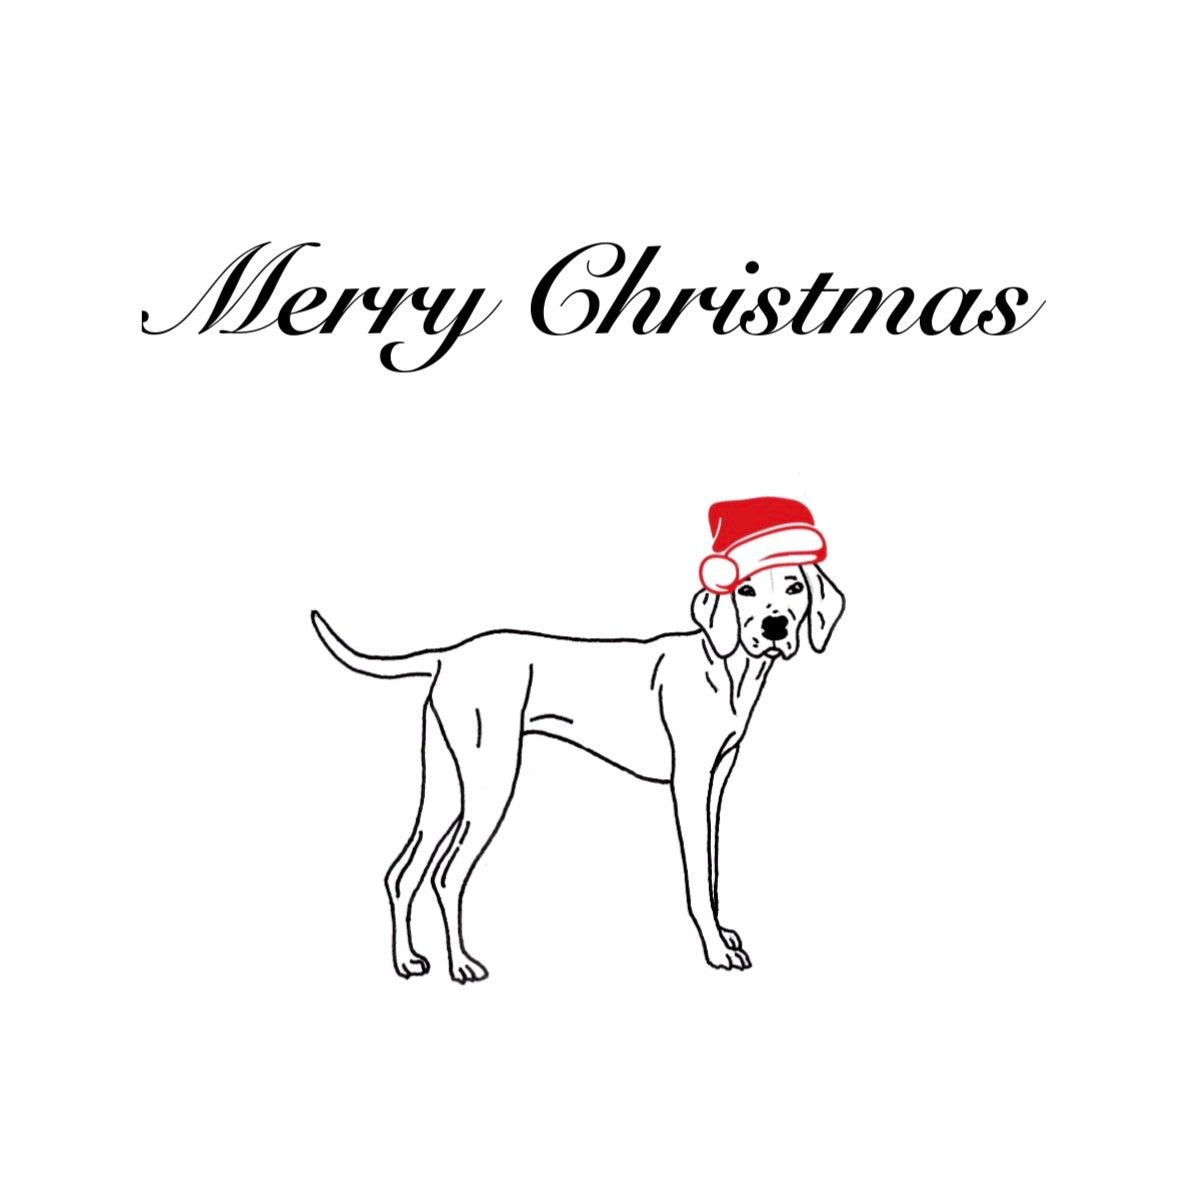 Merry Christmas Greeting Card - Dog with Santa Hat